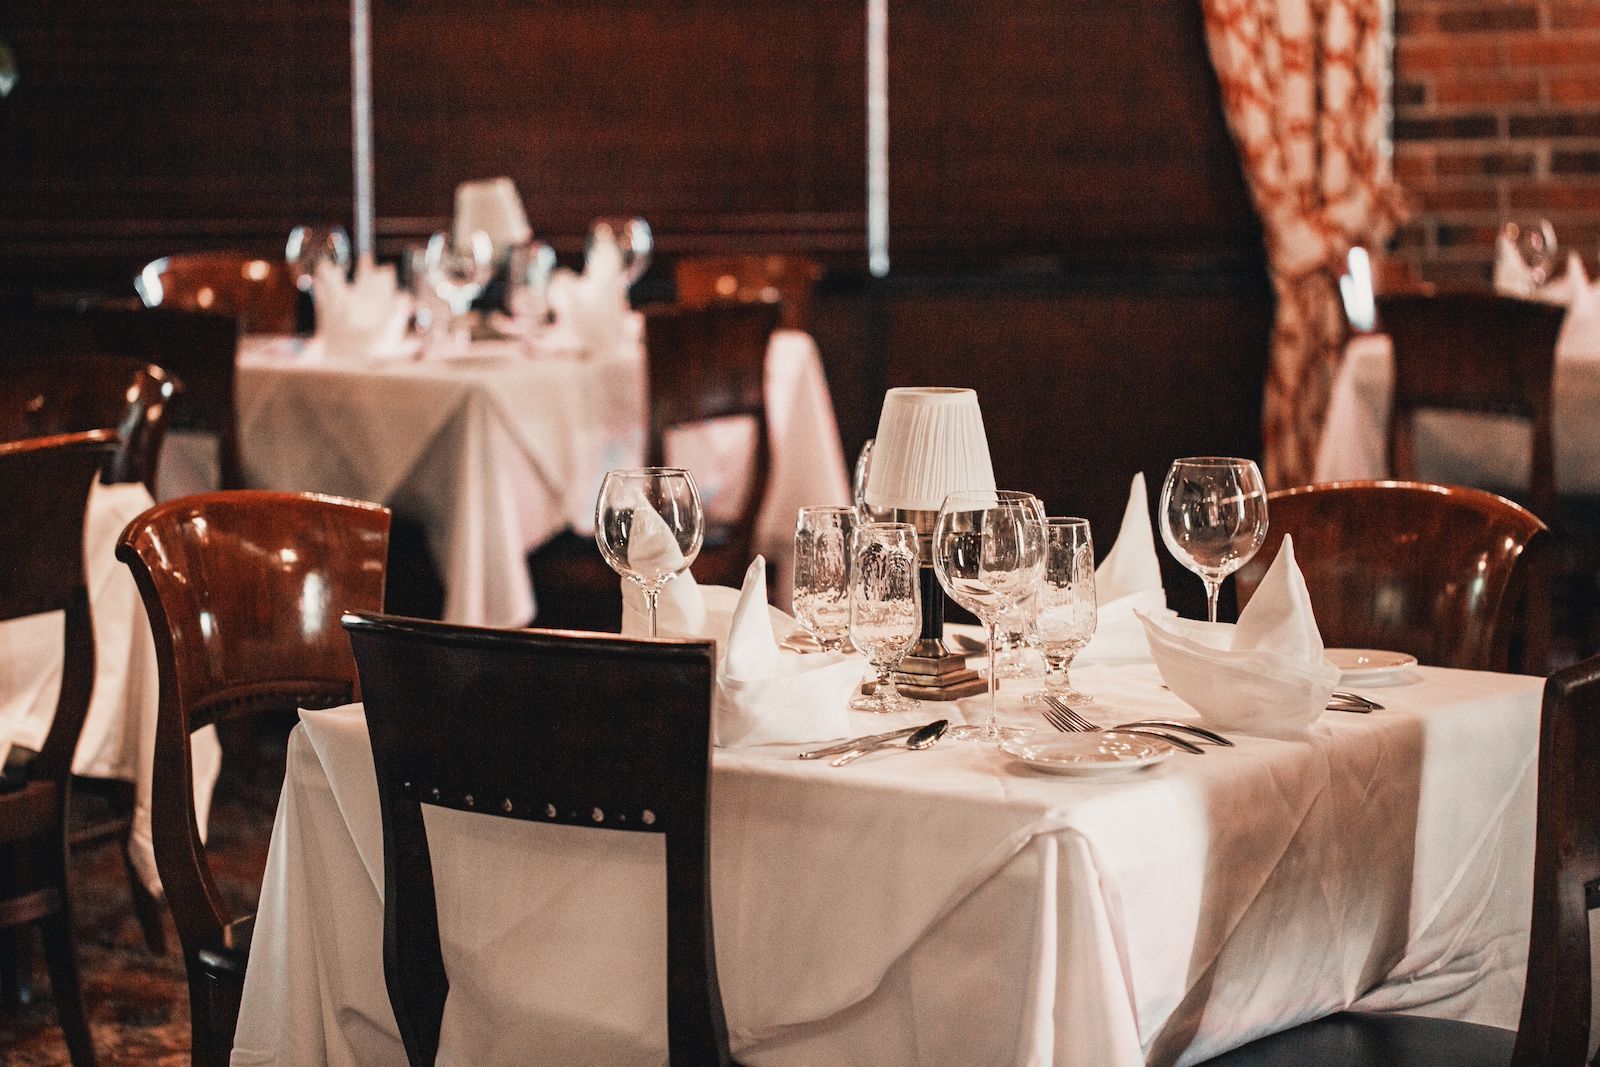 Dine in Style This Valentine’s Day. Savor Columbia Has Everything You Need to Plan a Great Dinner.